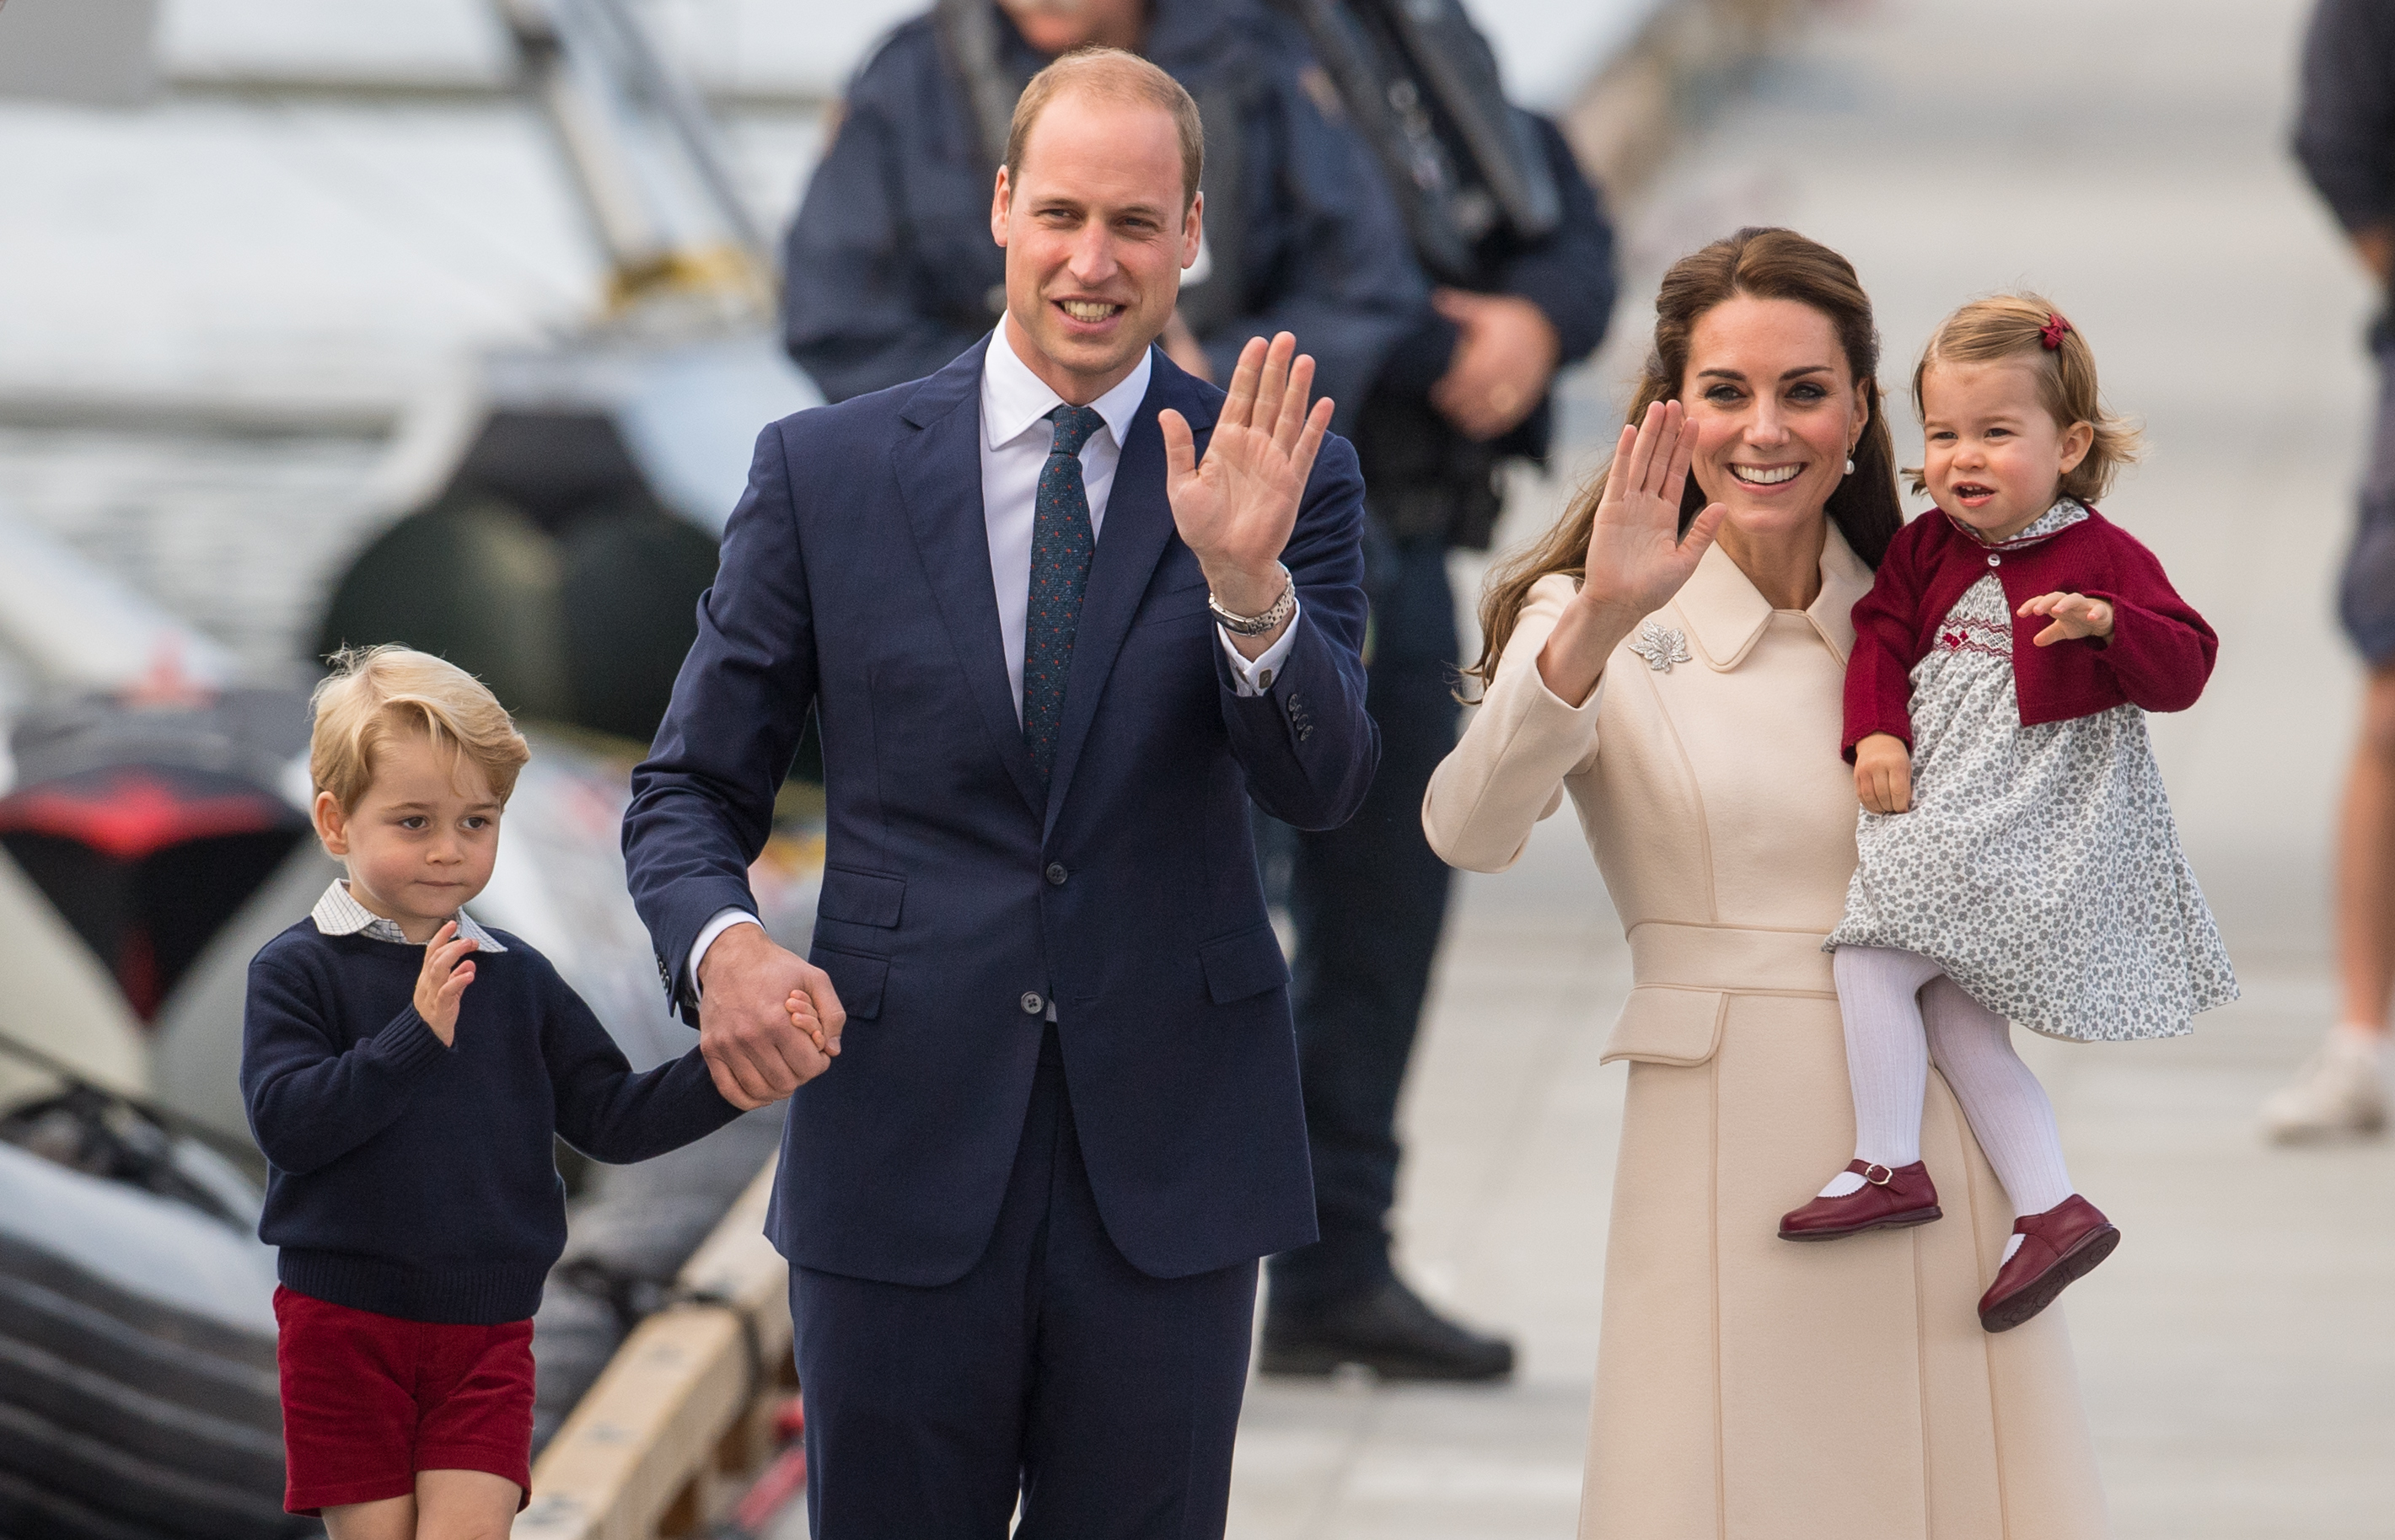 The Duke and Duchess of Cambridge, Prince George and Princess Charlotte wave to the crowd before departing by sea plane from Victoria Harbour Airport in Victoria, Canada, on the eighth day of the Royal Tour to Canada